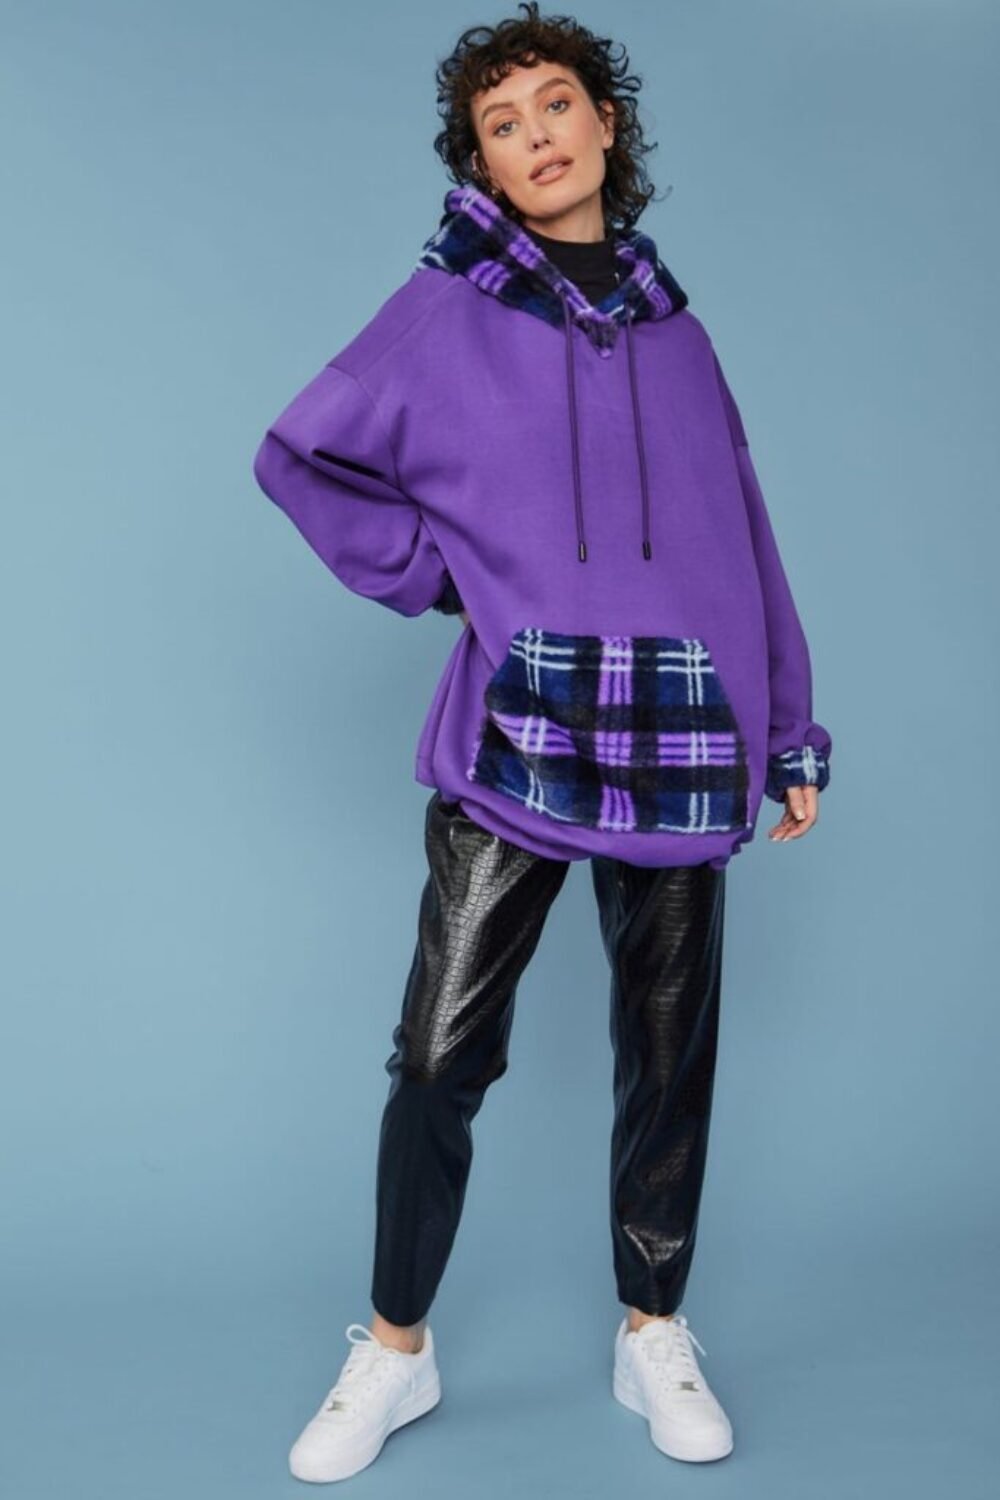 Shop Lux Purple Check Faux Fur Hooded Jacket and women's luxury and designer clothes at www.lux-apparel.co.uk